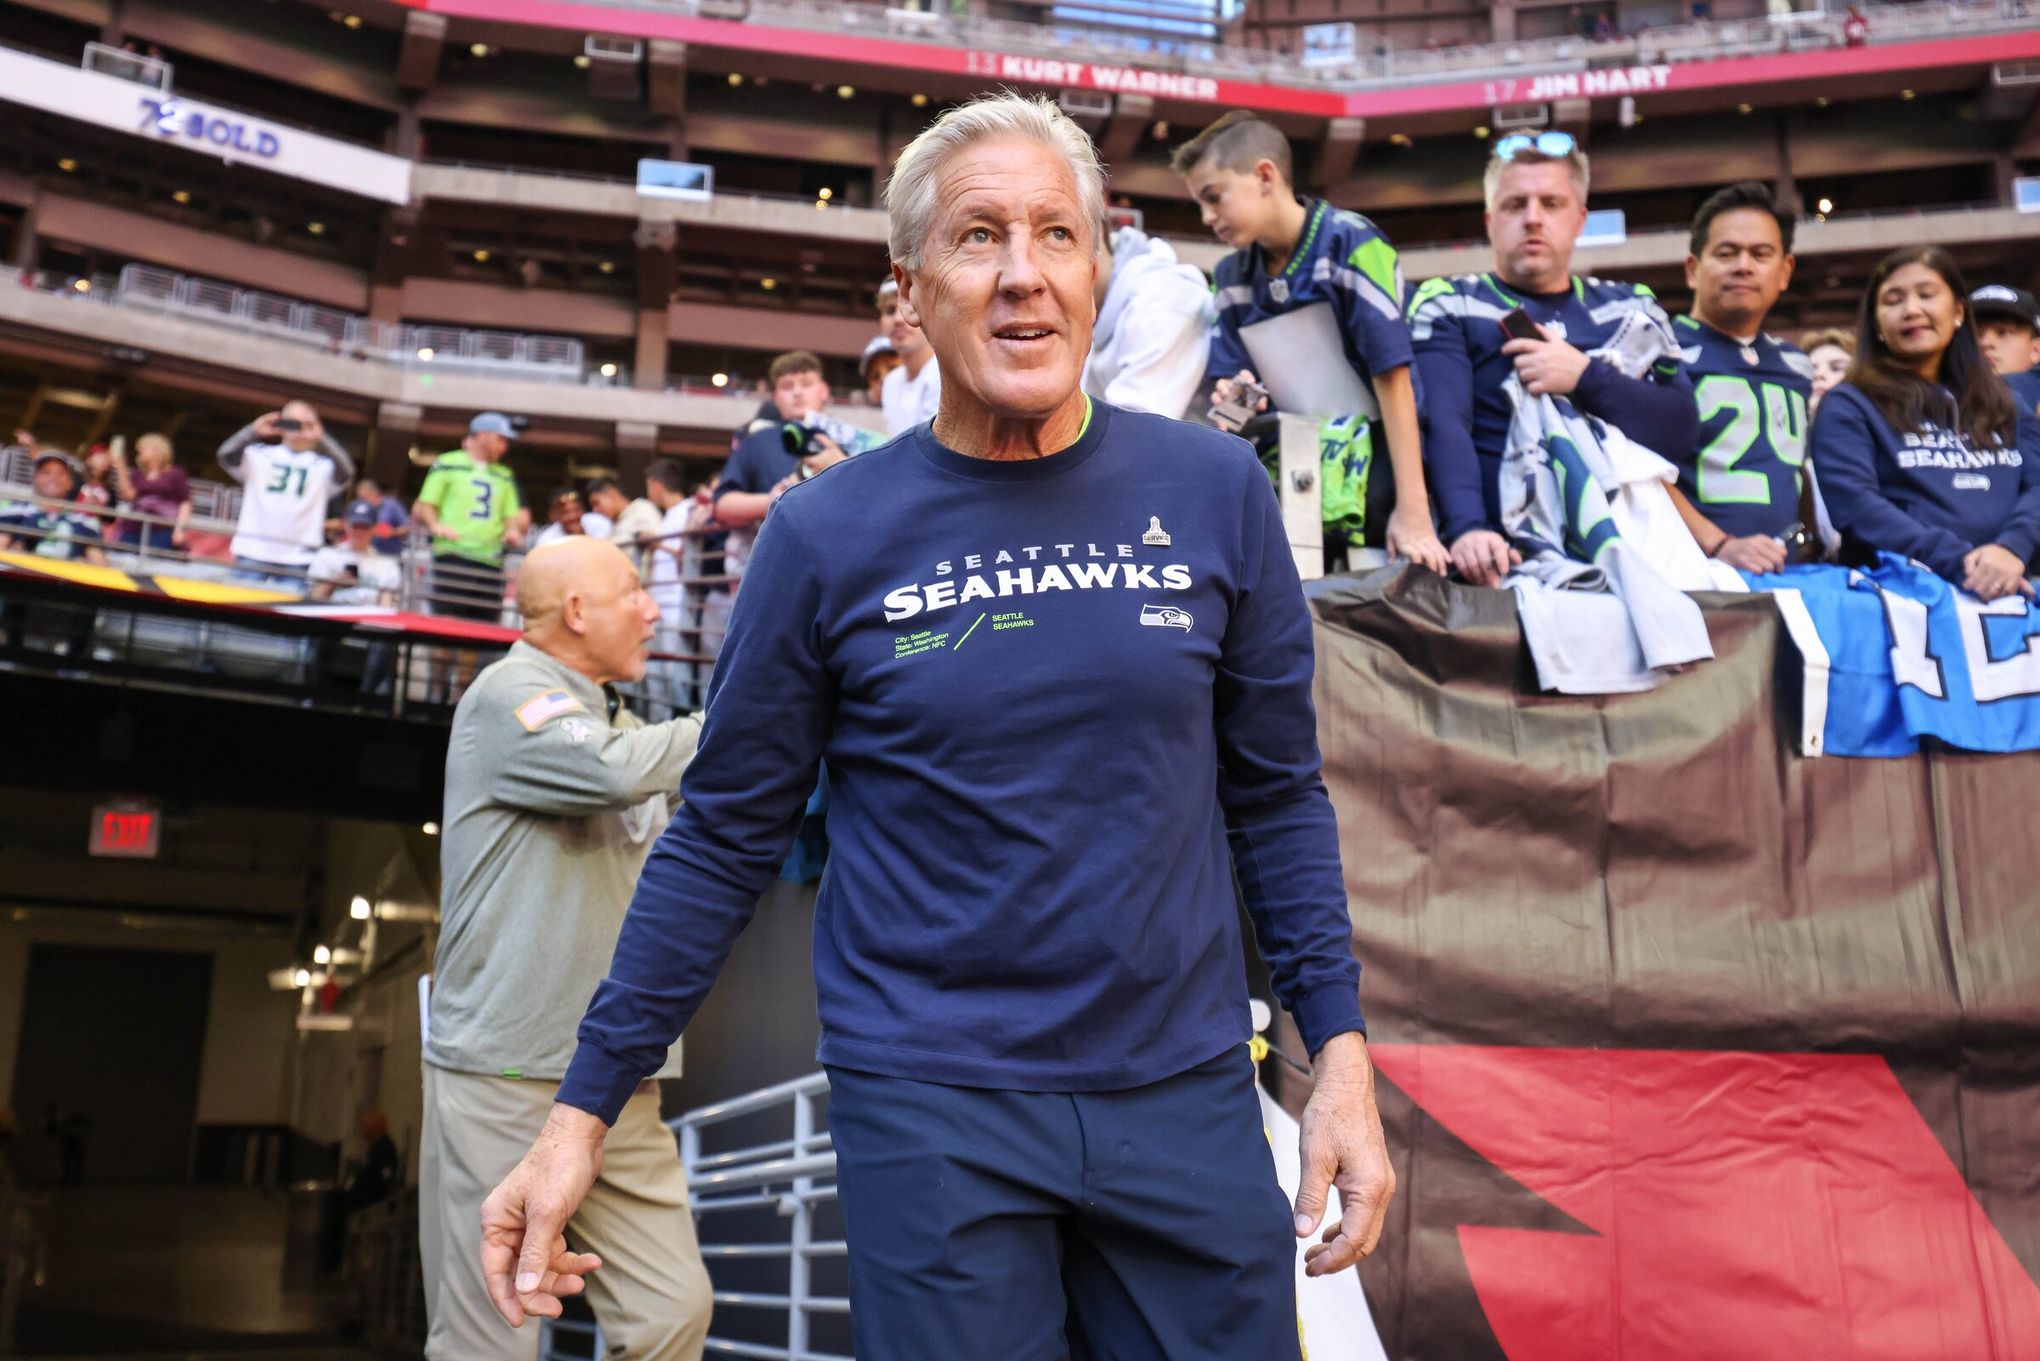 For this Seahawks fan club, excitement over Munich game is 'through the  roof'